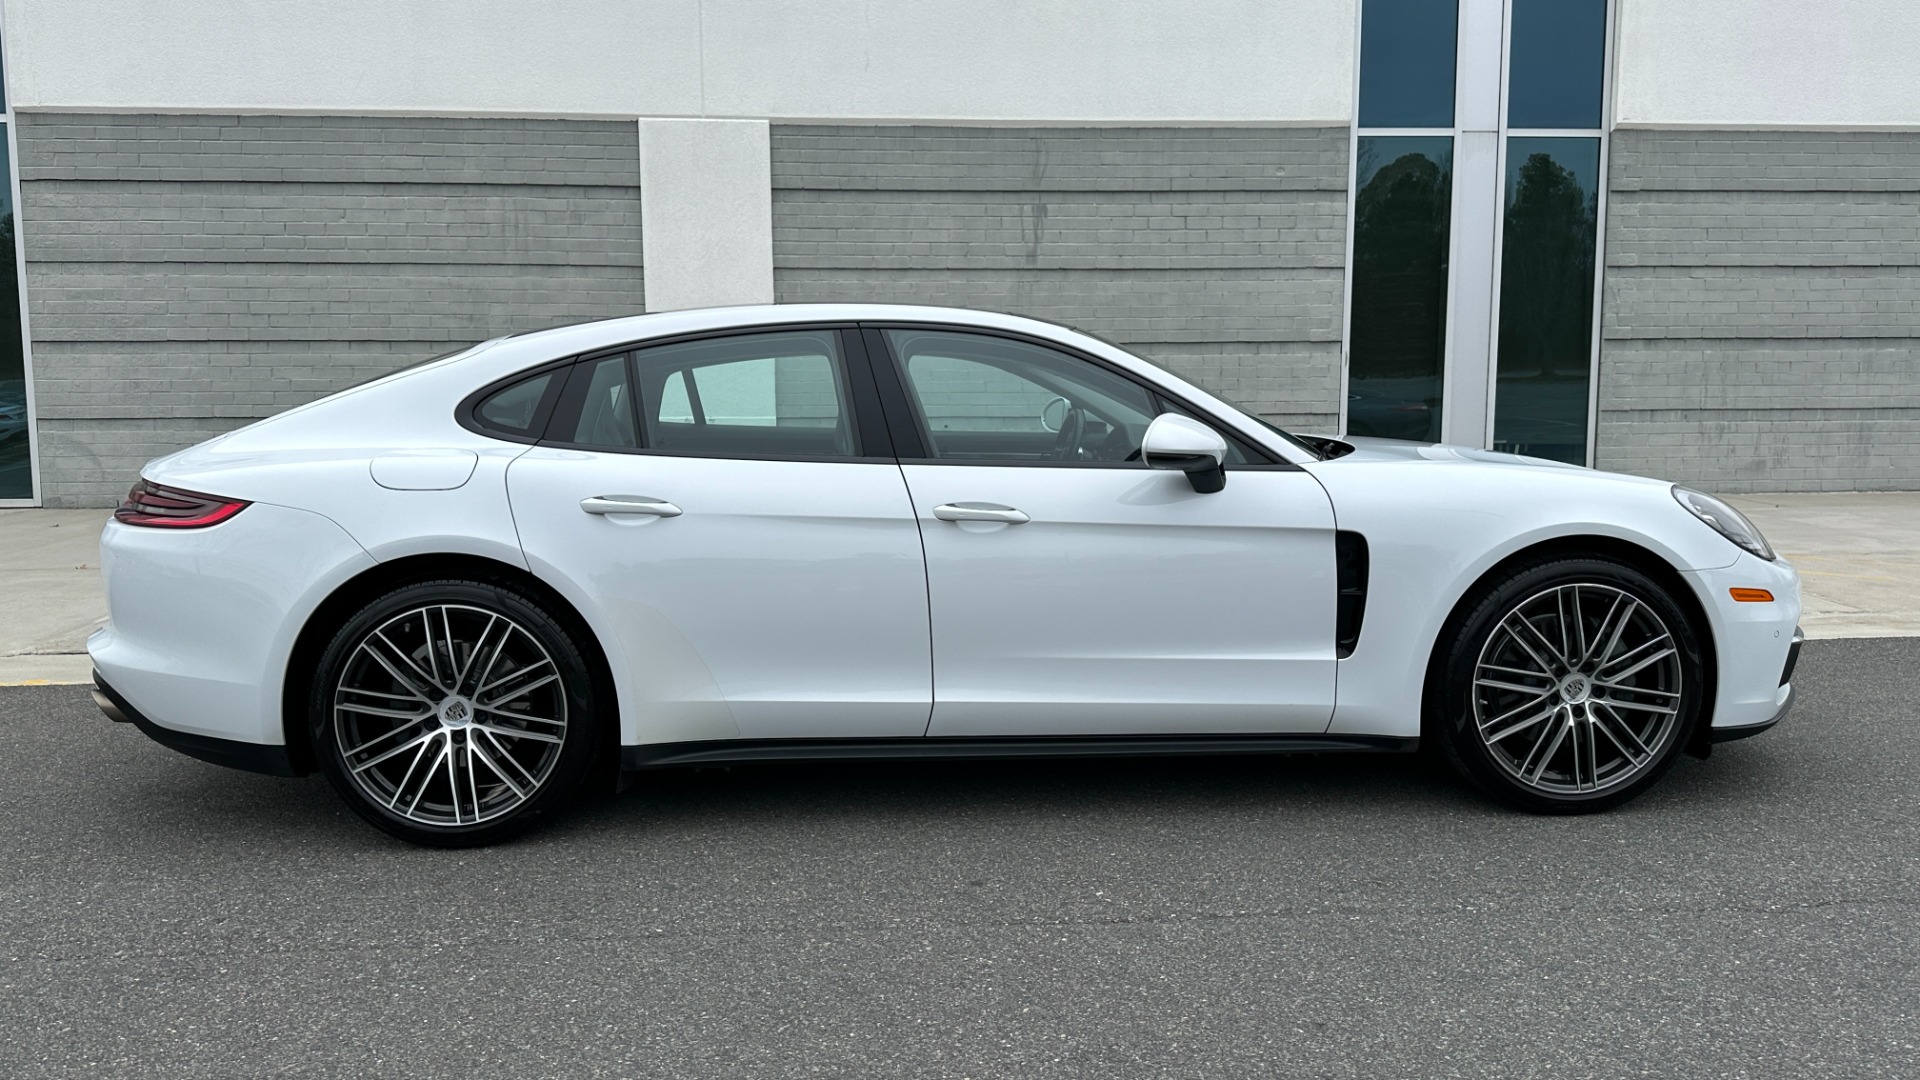 Used 2017 Porsche PANAMERA 4S / AWD / 2.9L TURBO / PREMIUM / SPORT CHRONO / BOSE / REARVIEW for sale Sold at Formula Imports in Charlotte NC 28227 6